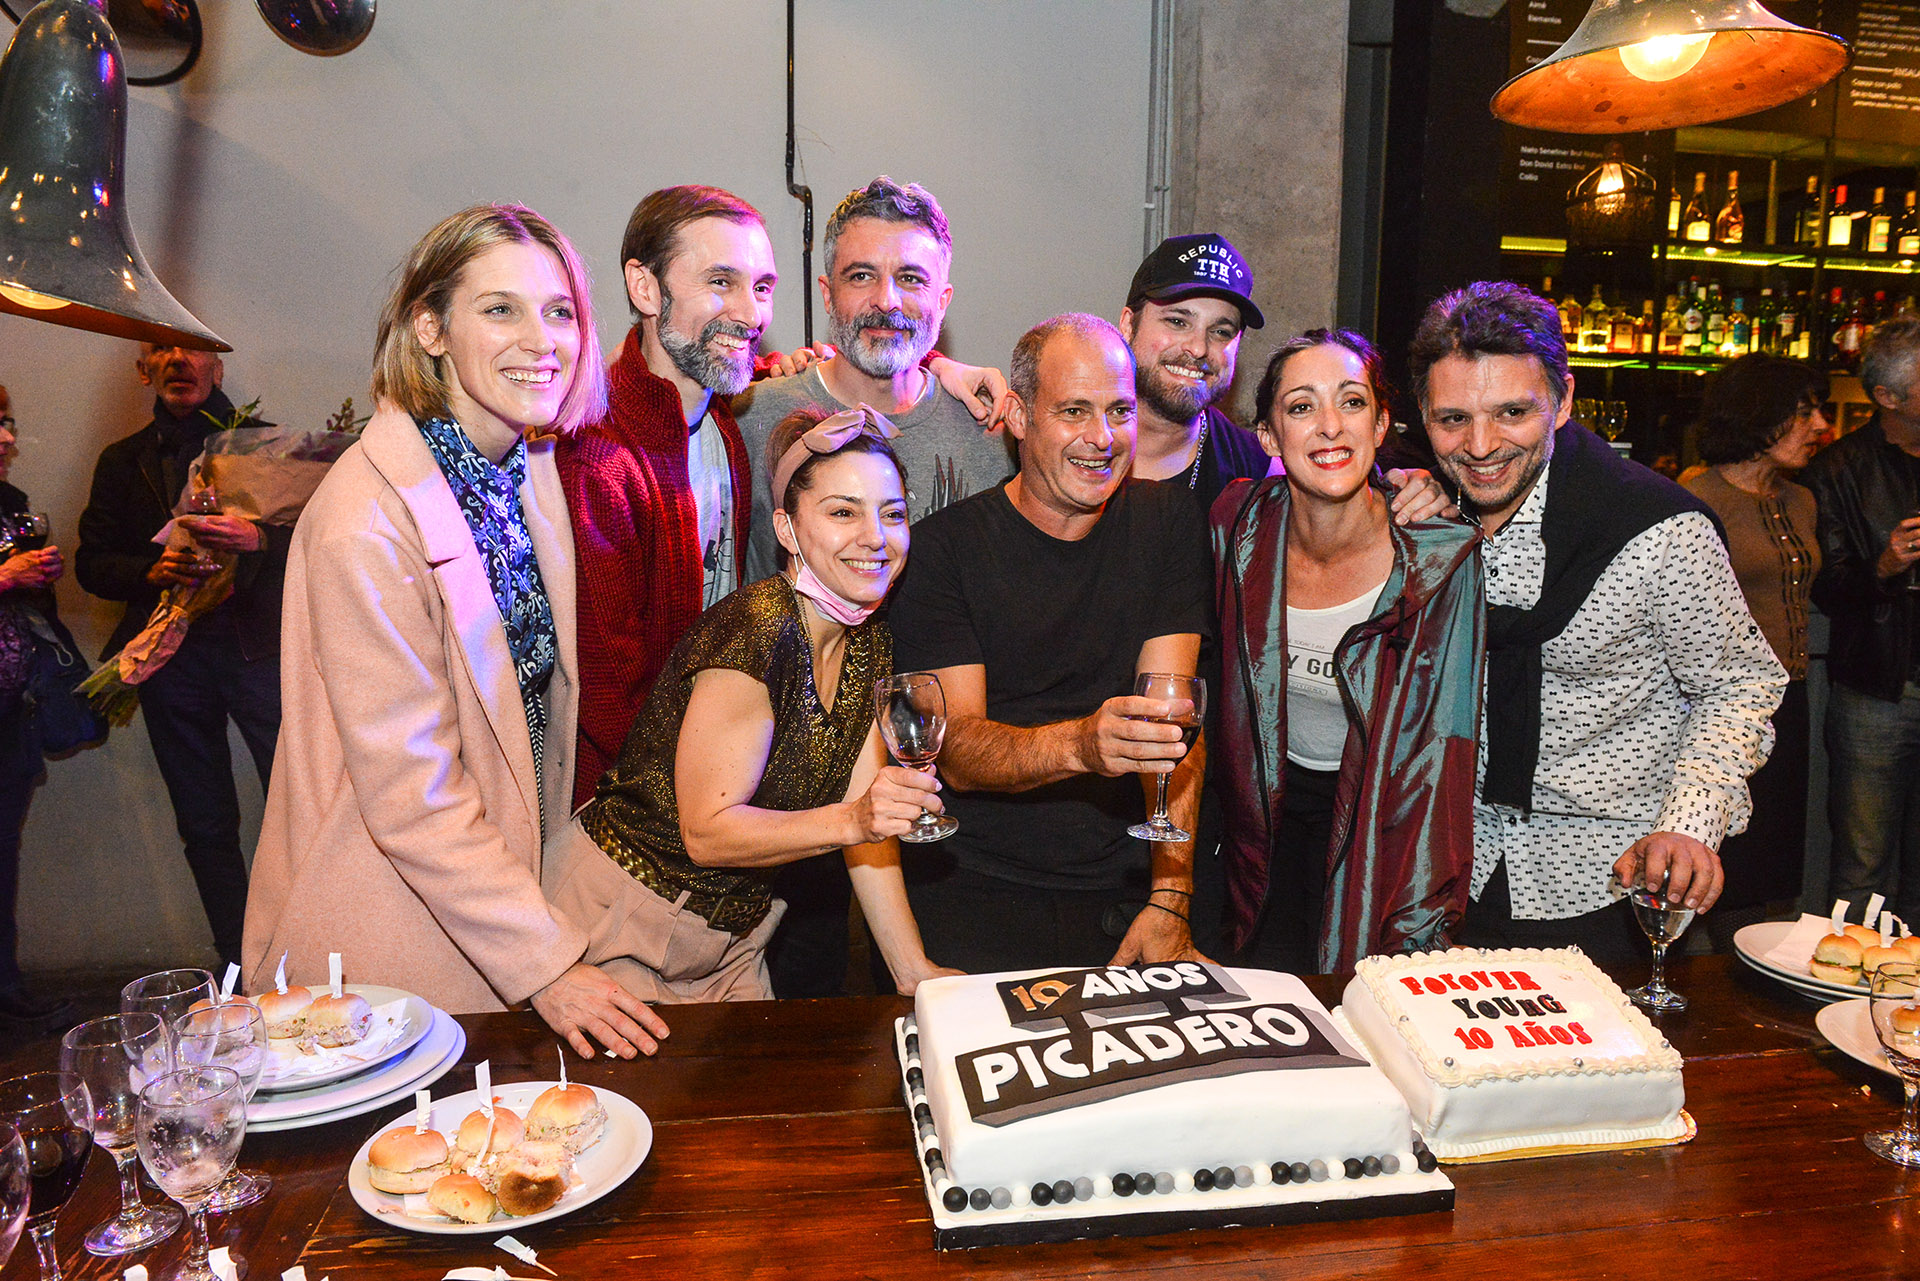 After the show, a cocktail party was held with the cast of Forever Young and celebrity guests.  Sebastián Blutrach accompanied by Ivanna Rossi, Wally Canella, Christian Giménez, Germán Tripel, Andrea Lovera and Hernán Matorras